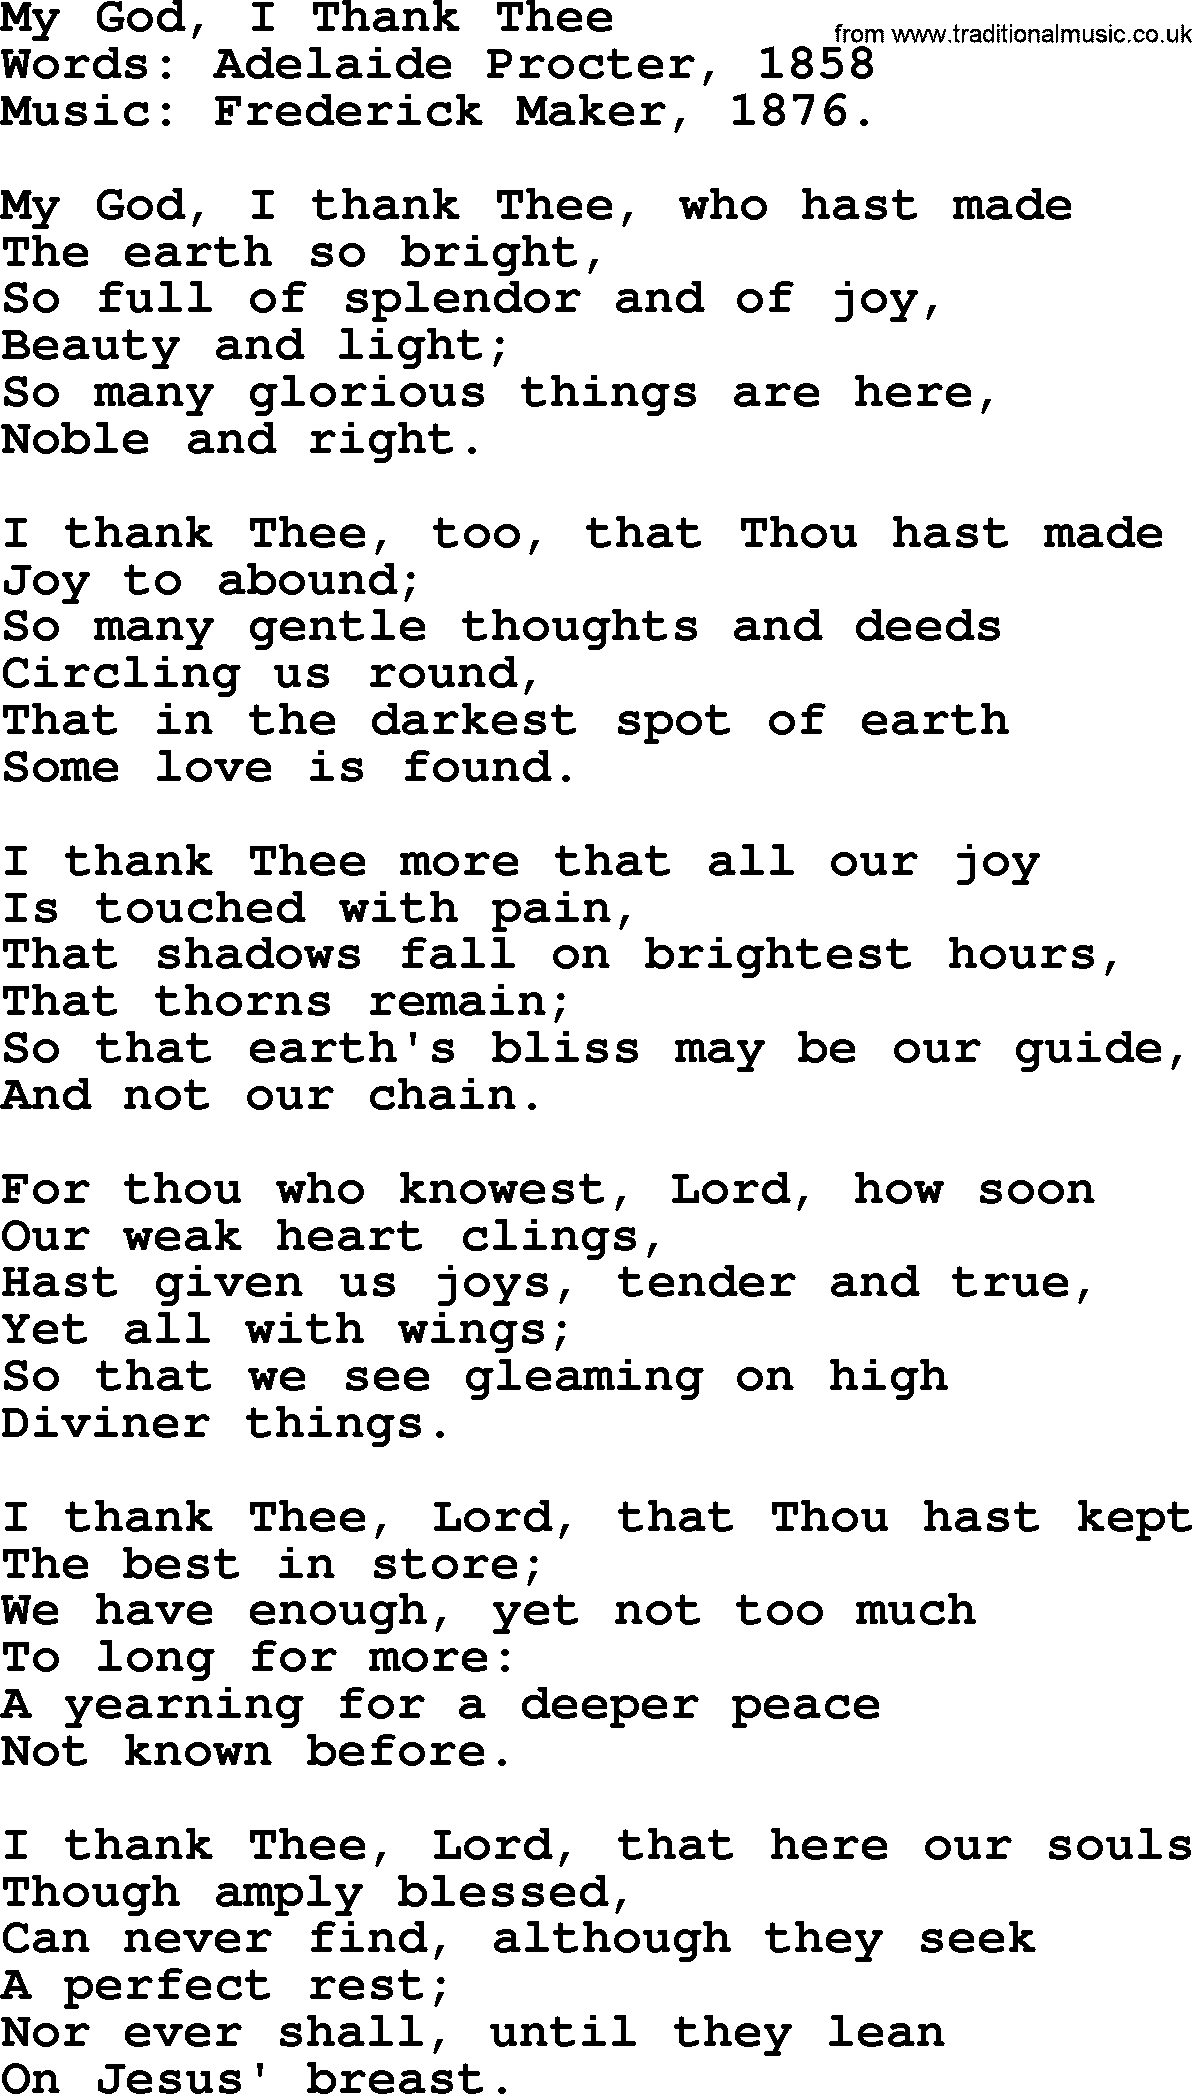 Thanksgiving Hymns and Songs: My God, I Thank Thee lyrics with PDF